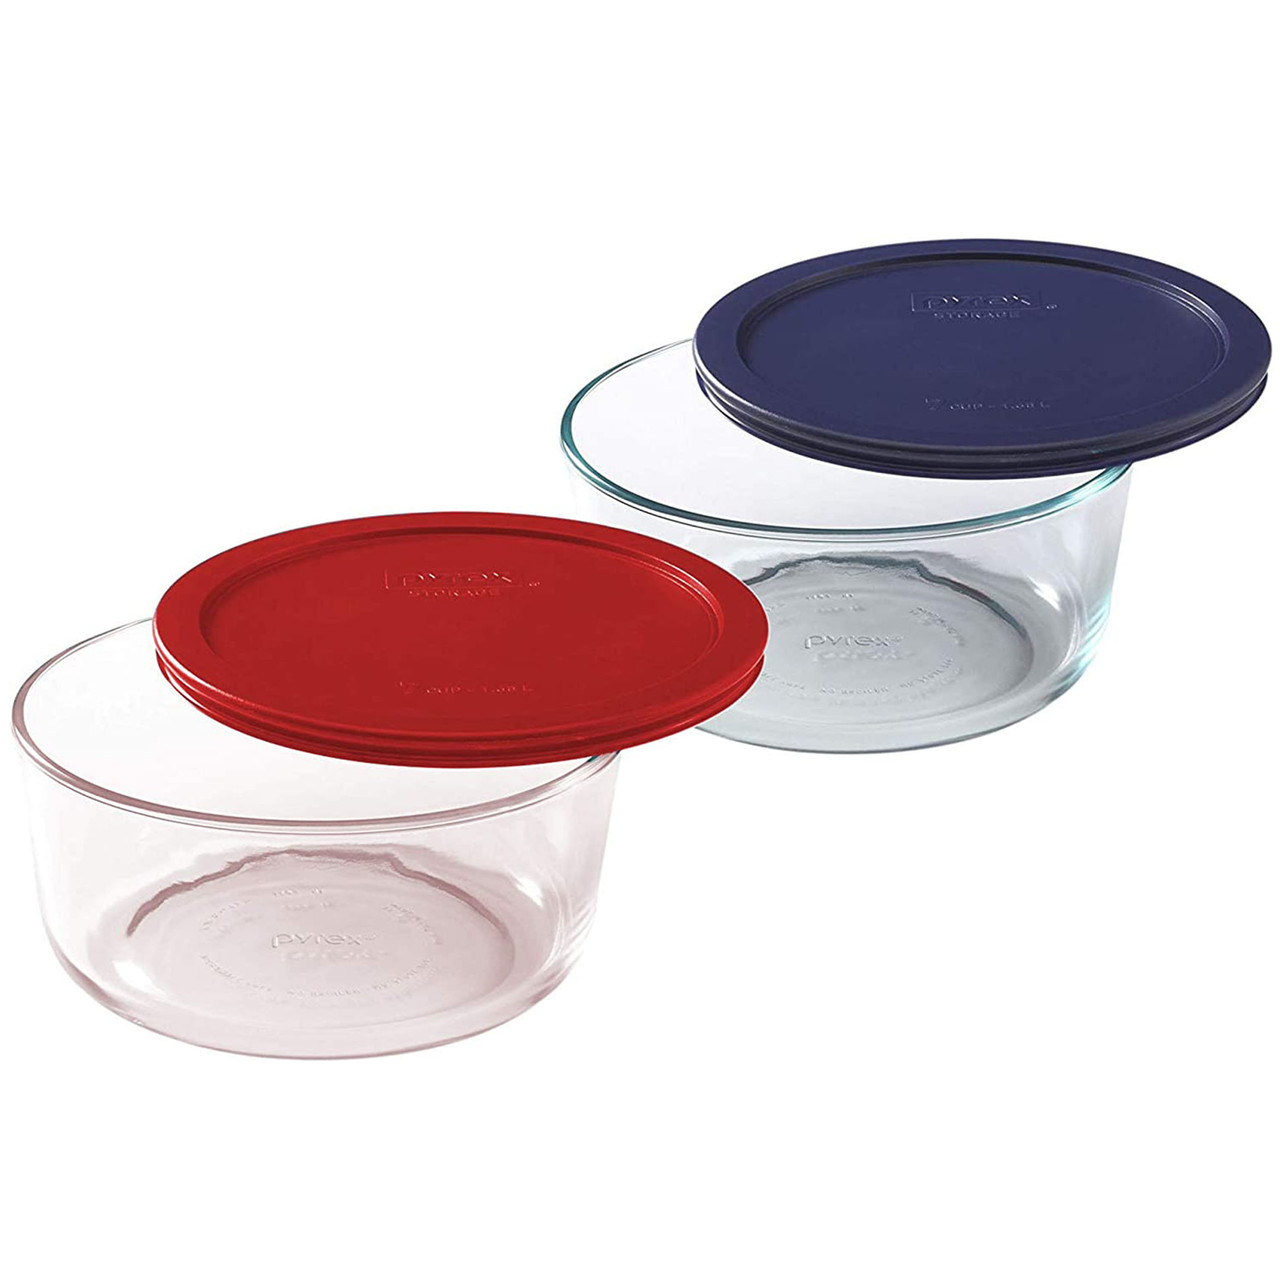 Pyrex 7203 7-Cup Round Glass Food Storage Bowls w/ 7402-PC 7-Cup Dark Blue & Red Lid Covers